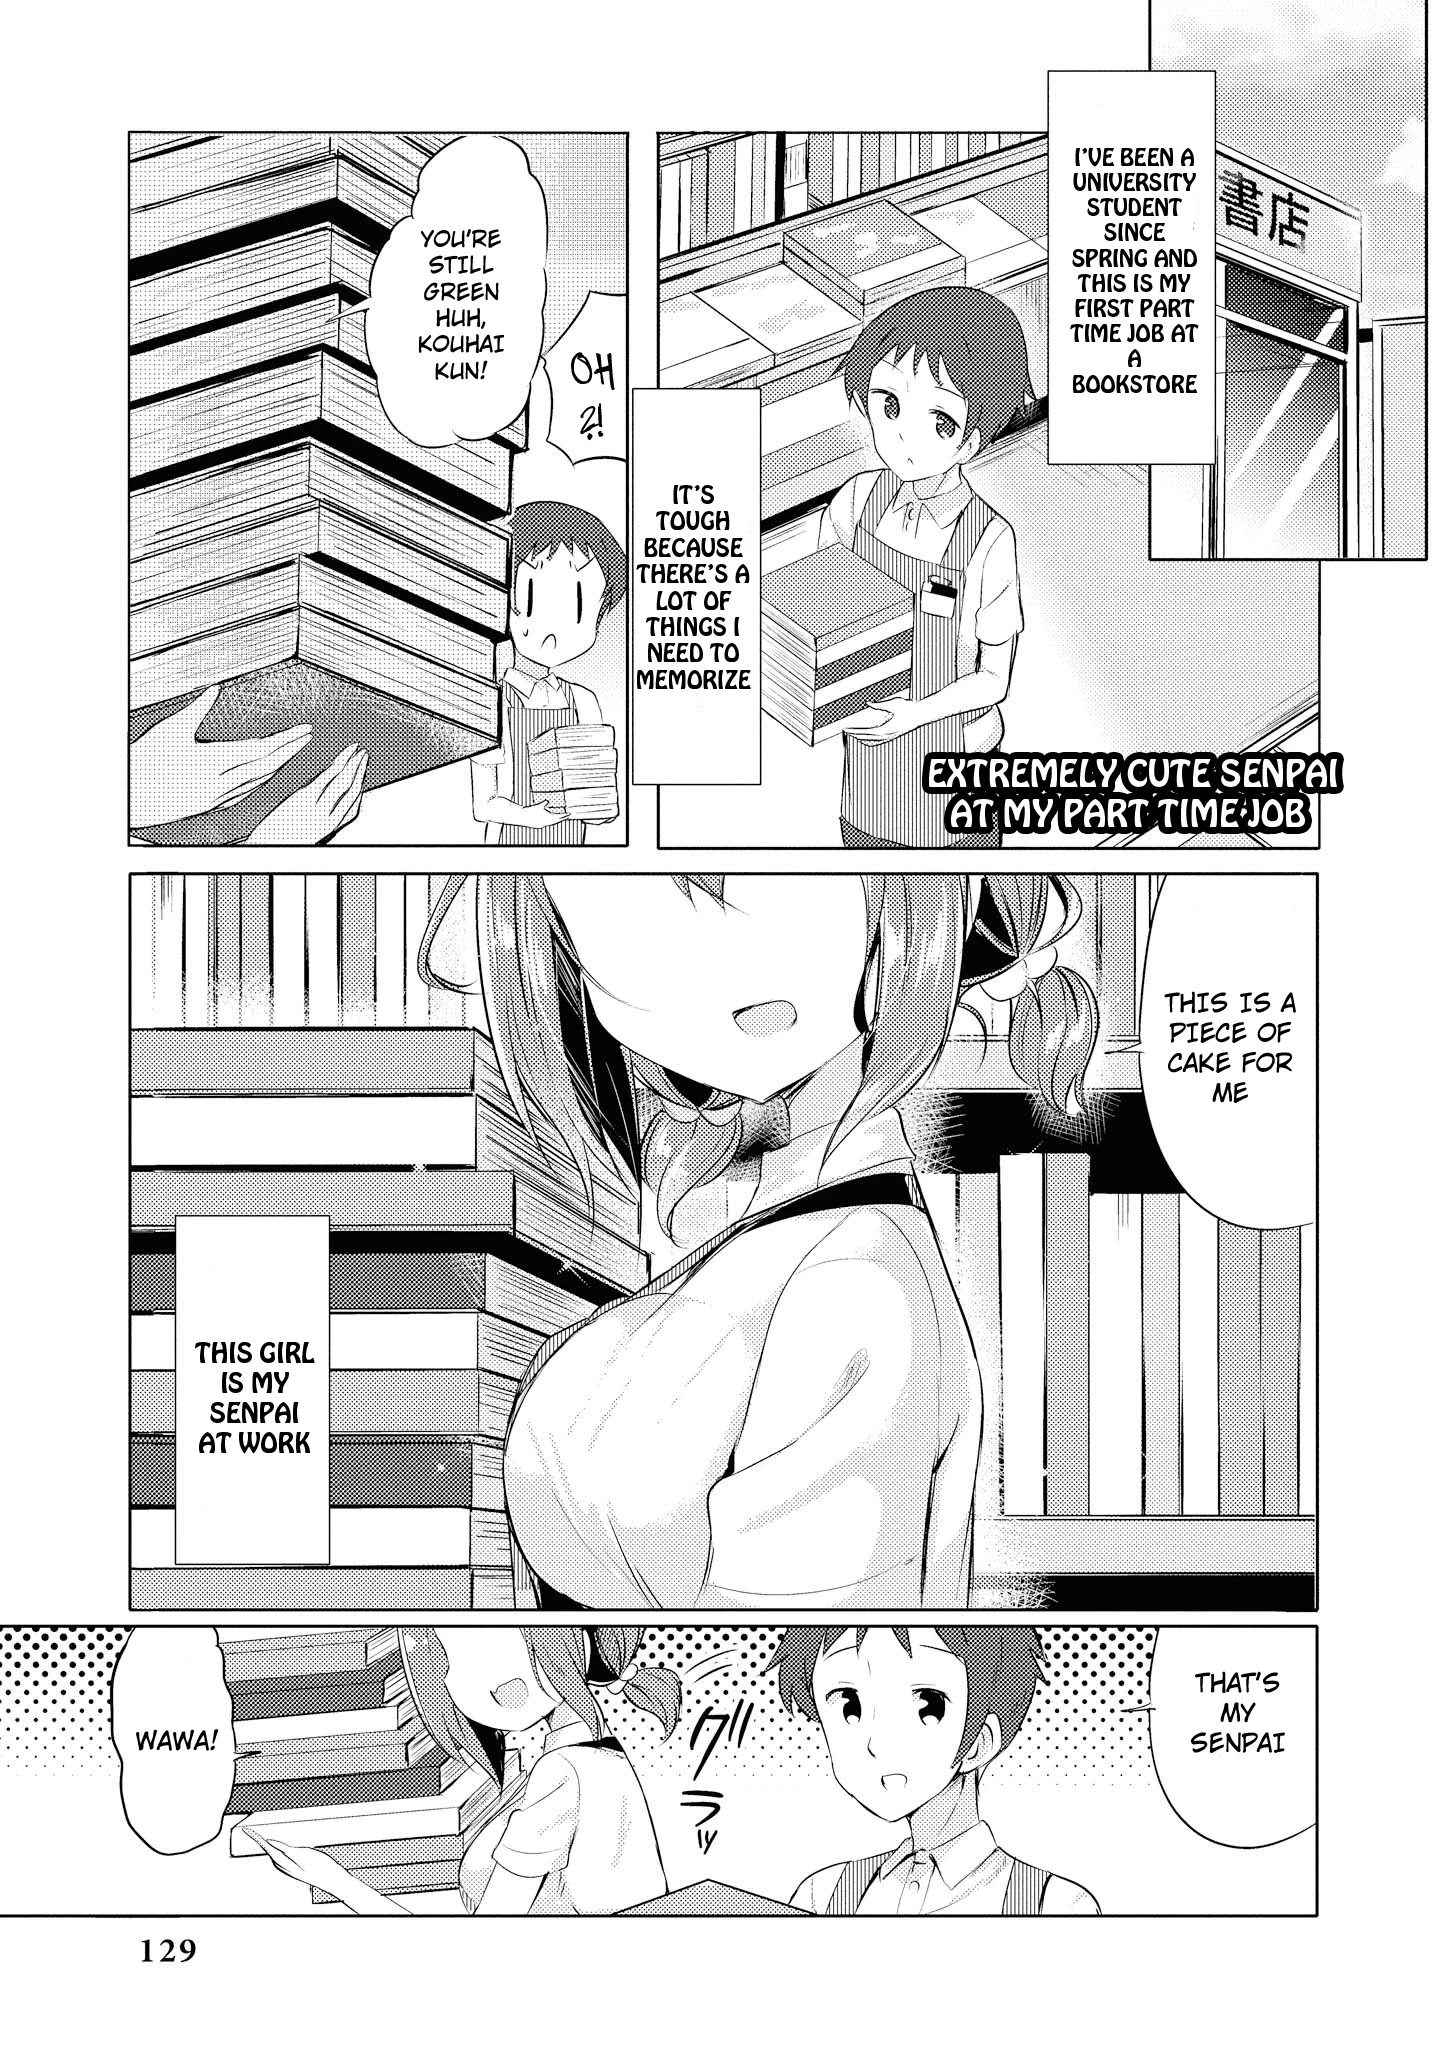 Do You Like Fluffy Boobs? Busty Girl Anthology Comic Chapter 17: Extremely Cute Senpai At My Part Time Job By Kurou - Picture 2